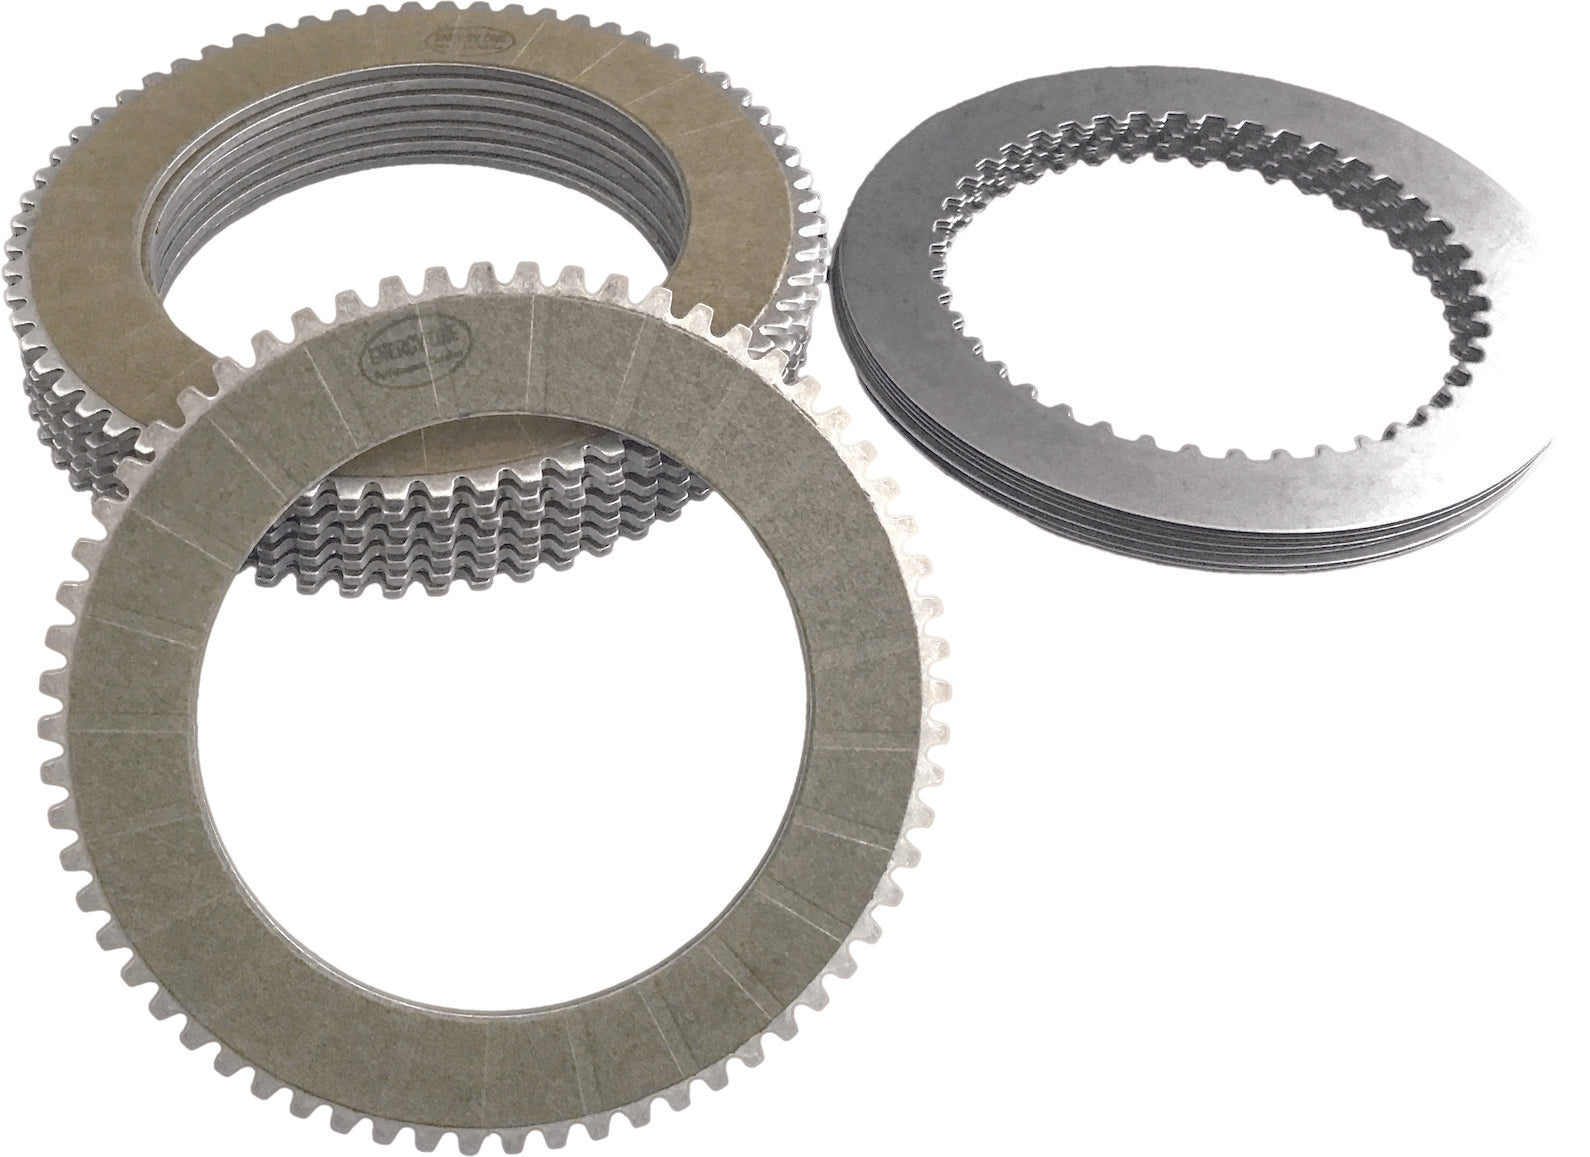 ENERGY ONE, ENERGY ONE E1 REPLACEMENT CLUTCH KIT FOR BRUTE III IV NEW HUB RP-0009